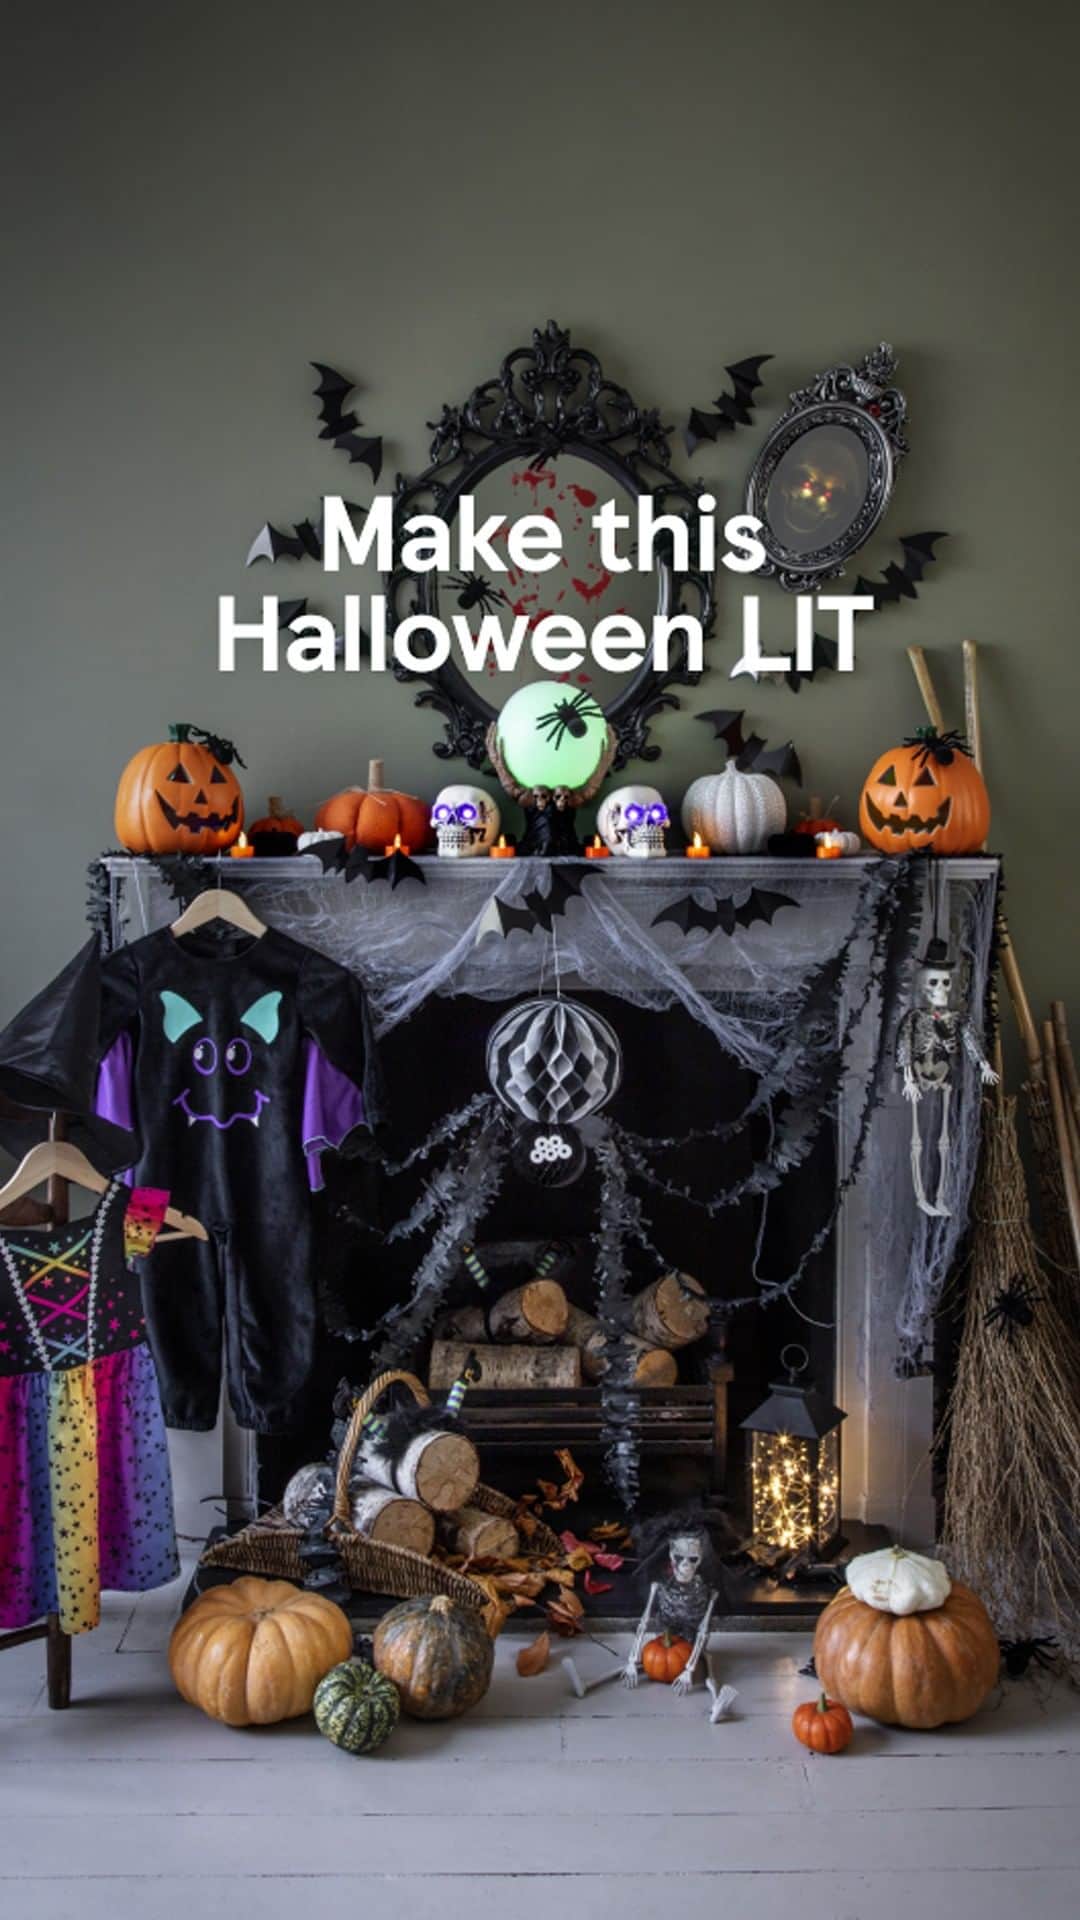 Tesco Food Officialのインスタグラム：「Transform your home into a house of horrors this Halloween. 👻 From creepy skulls and pumpkins to haunted magic mirrors. Get set for spooky season by clicking the link in our bio. 🎃」